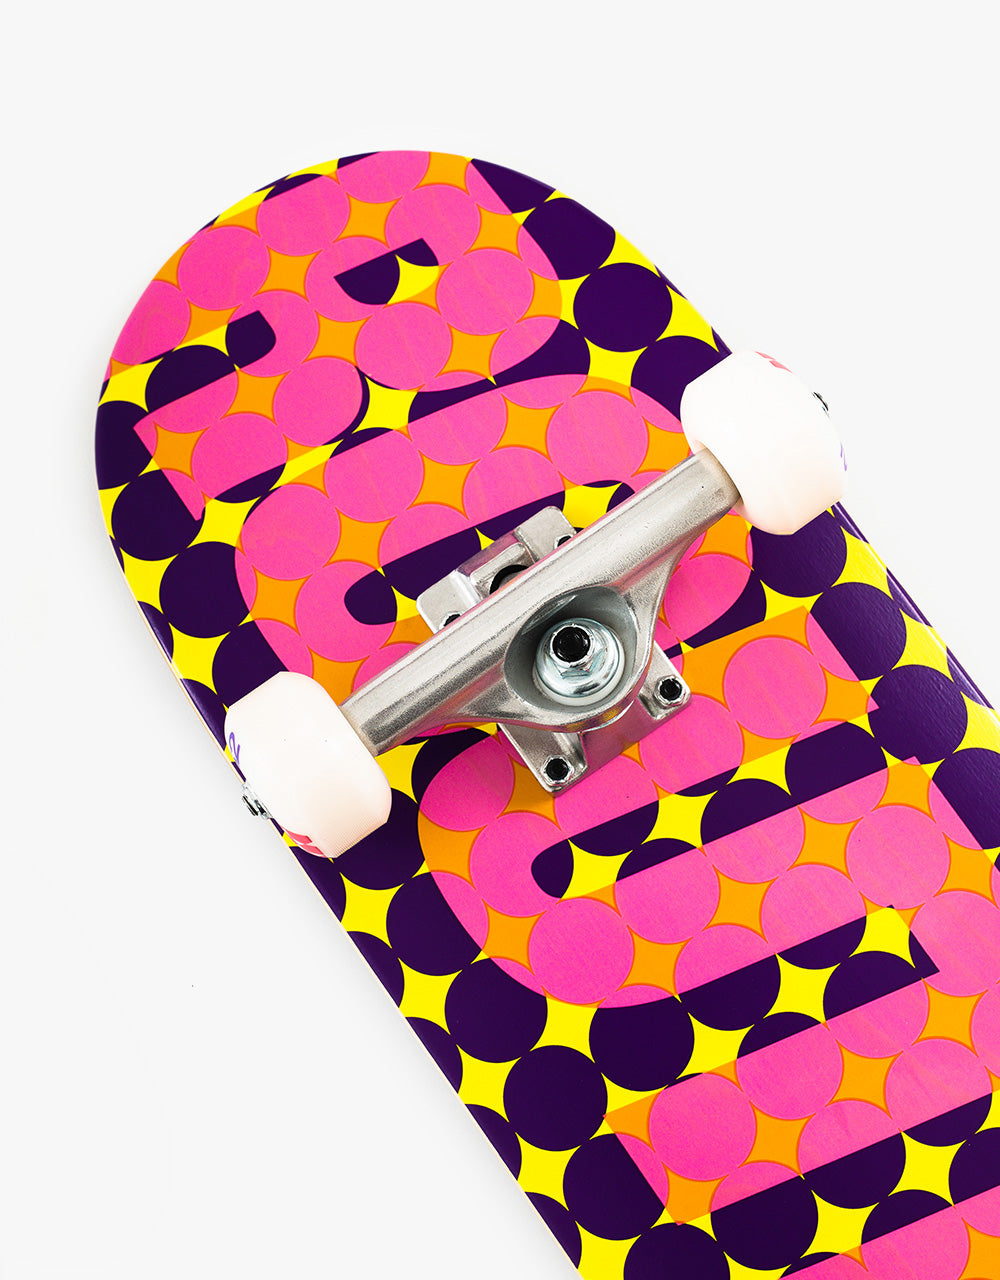 Route One Geometric Complete Skateboard - 8"